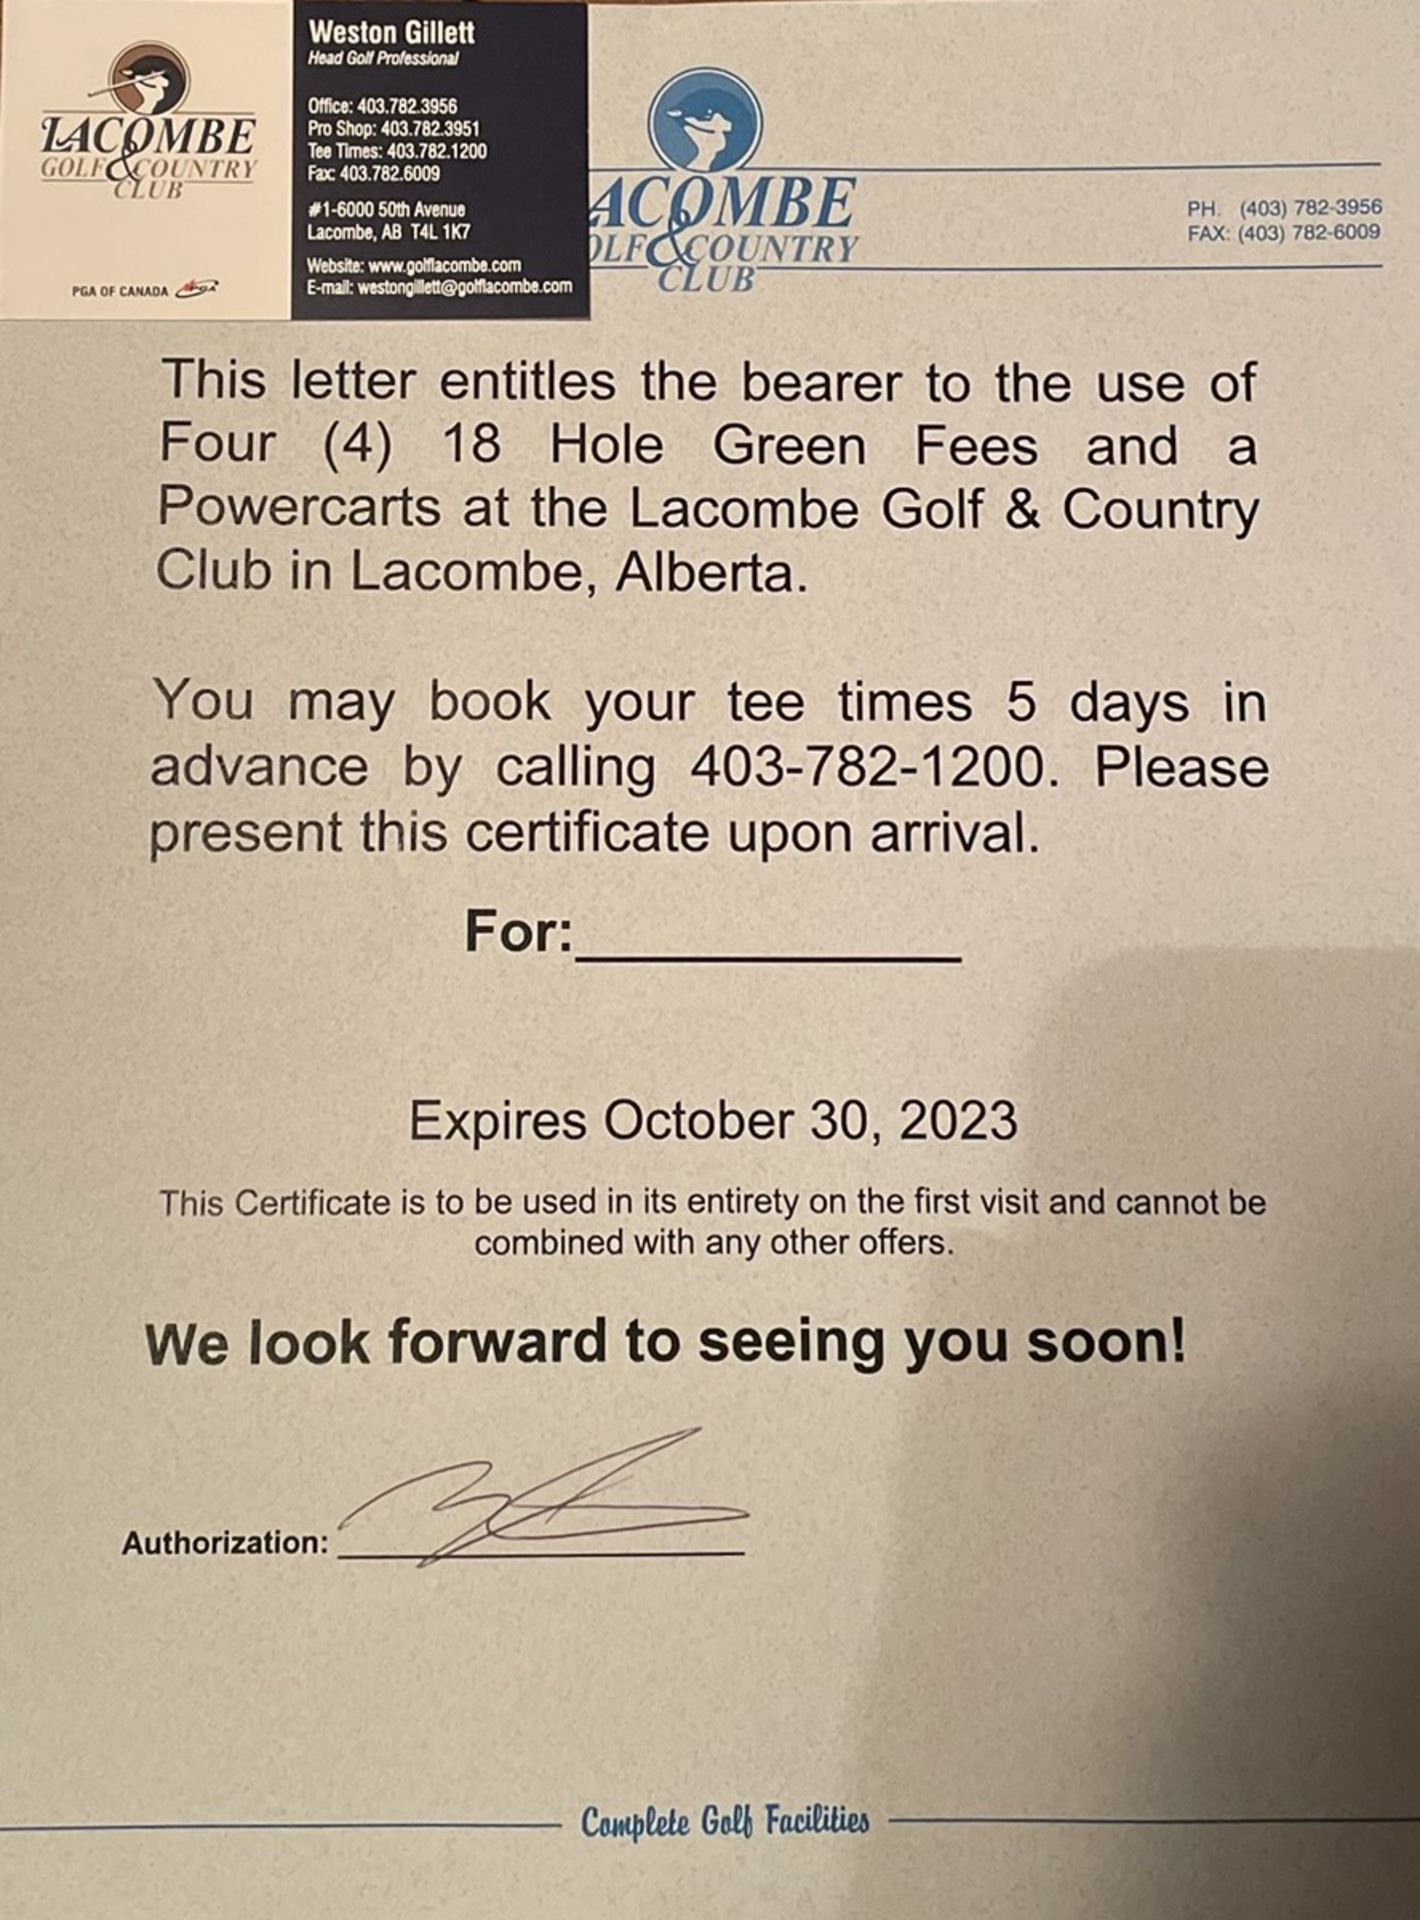 4 - 18 Hole Green Fees w/ Powercarts @ Lacombe Golf & Country Club